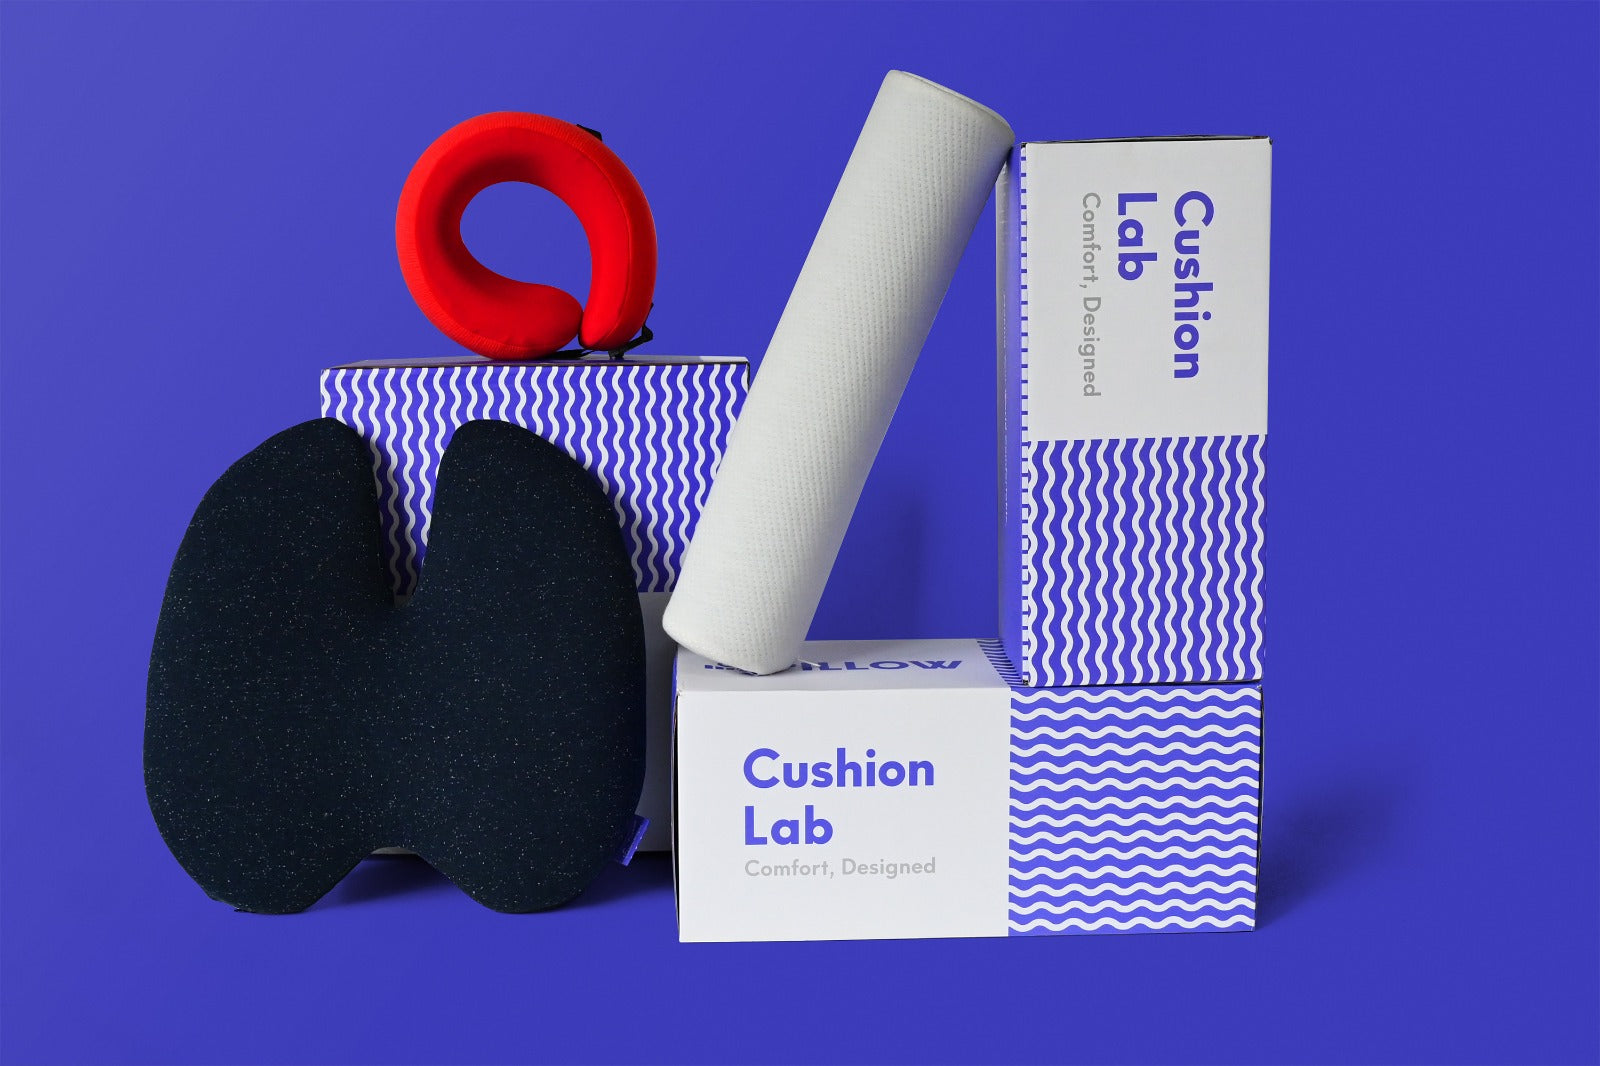 How The Cushion Lab Grew Sales by 9x - Ware2Go